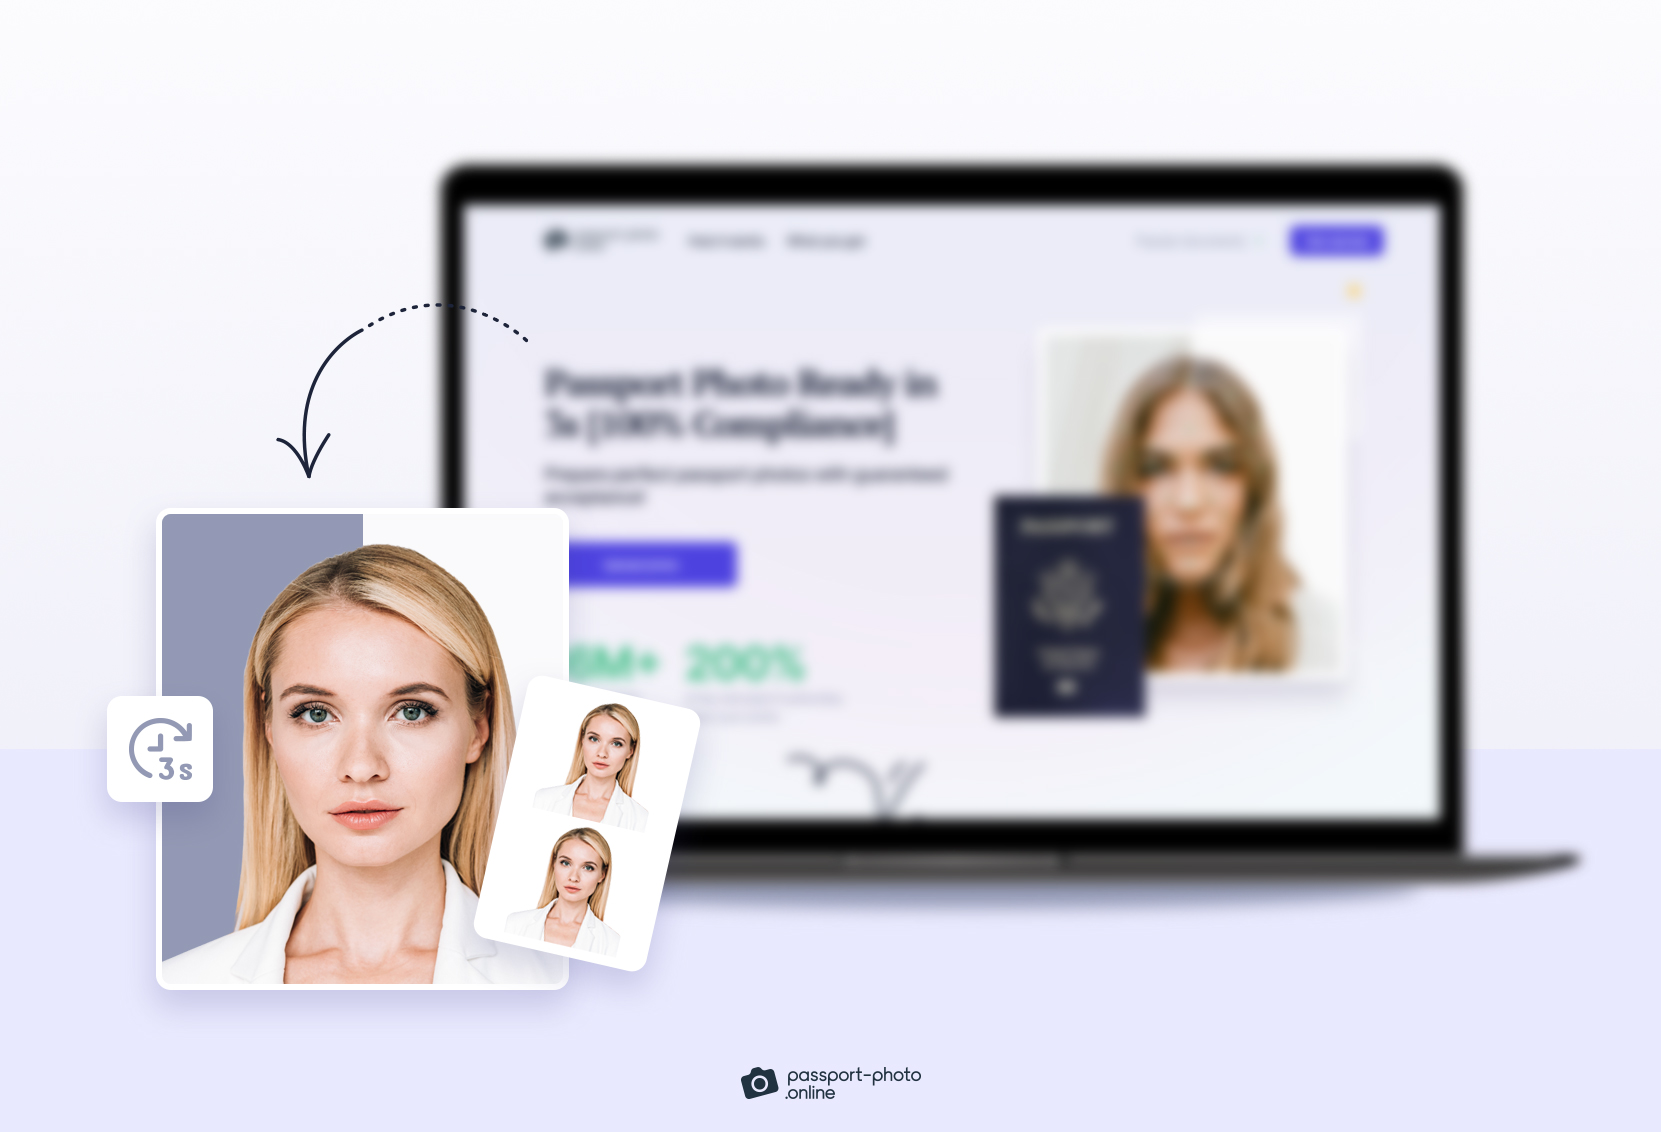 A woman uploads an existing photo to Passport Photo Online’s website and instantly receives a compliant passport photo.